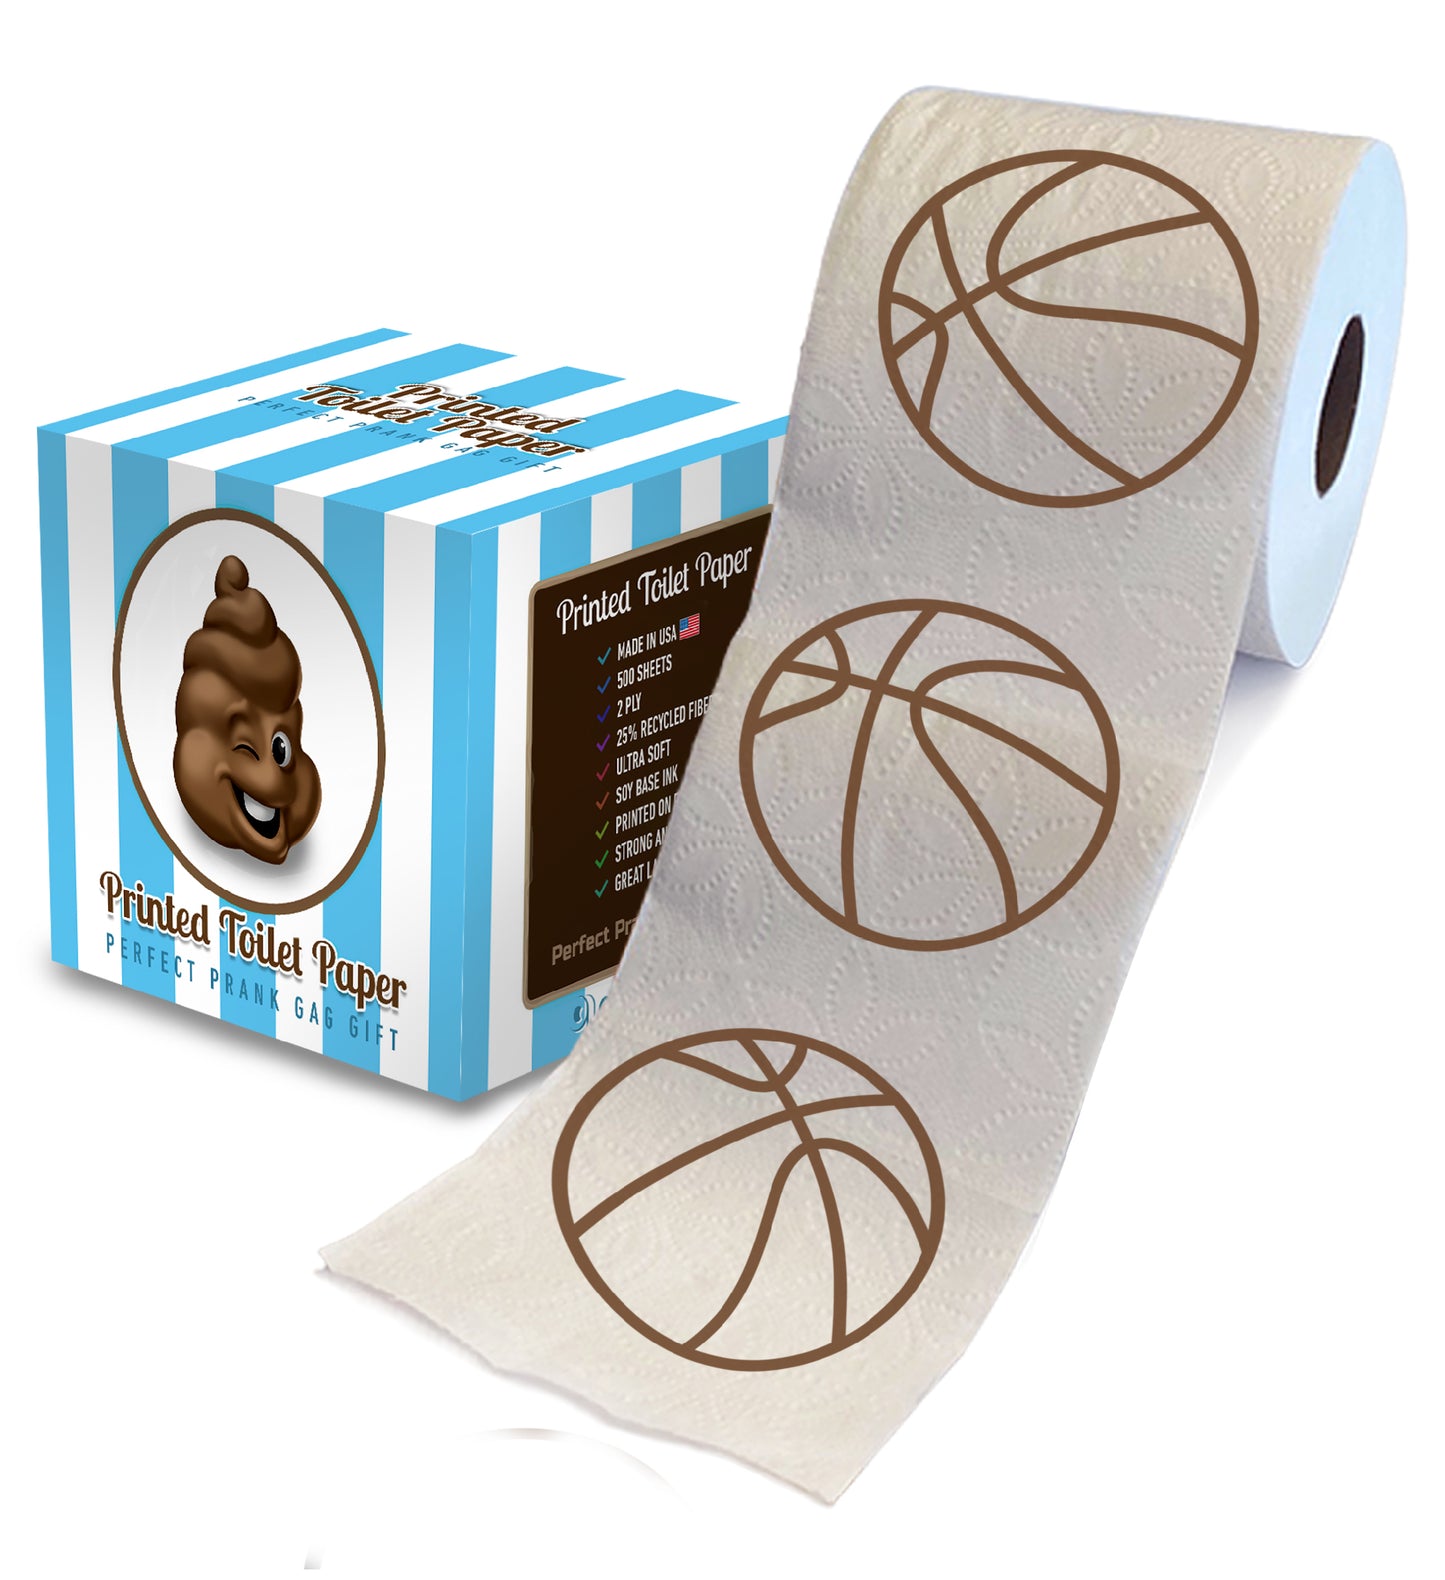 Printed TP Fun Sports Games Printed Toilet Paper Roll - 500 Sheets Basketball